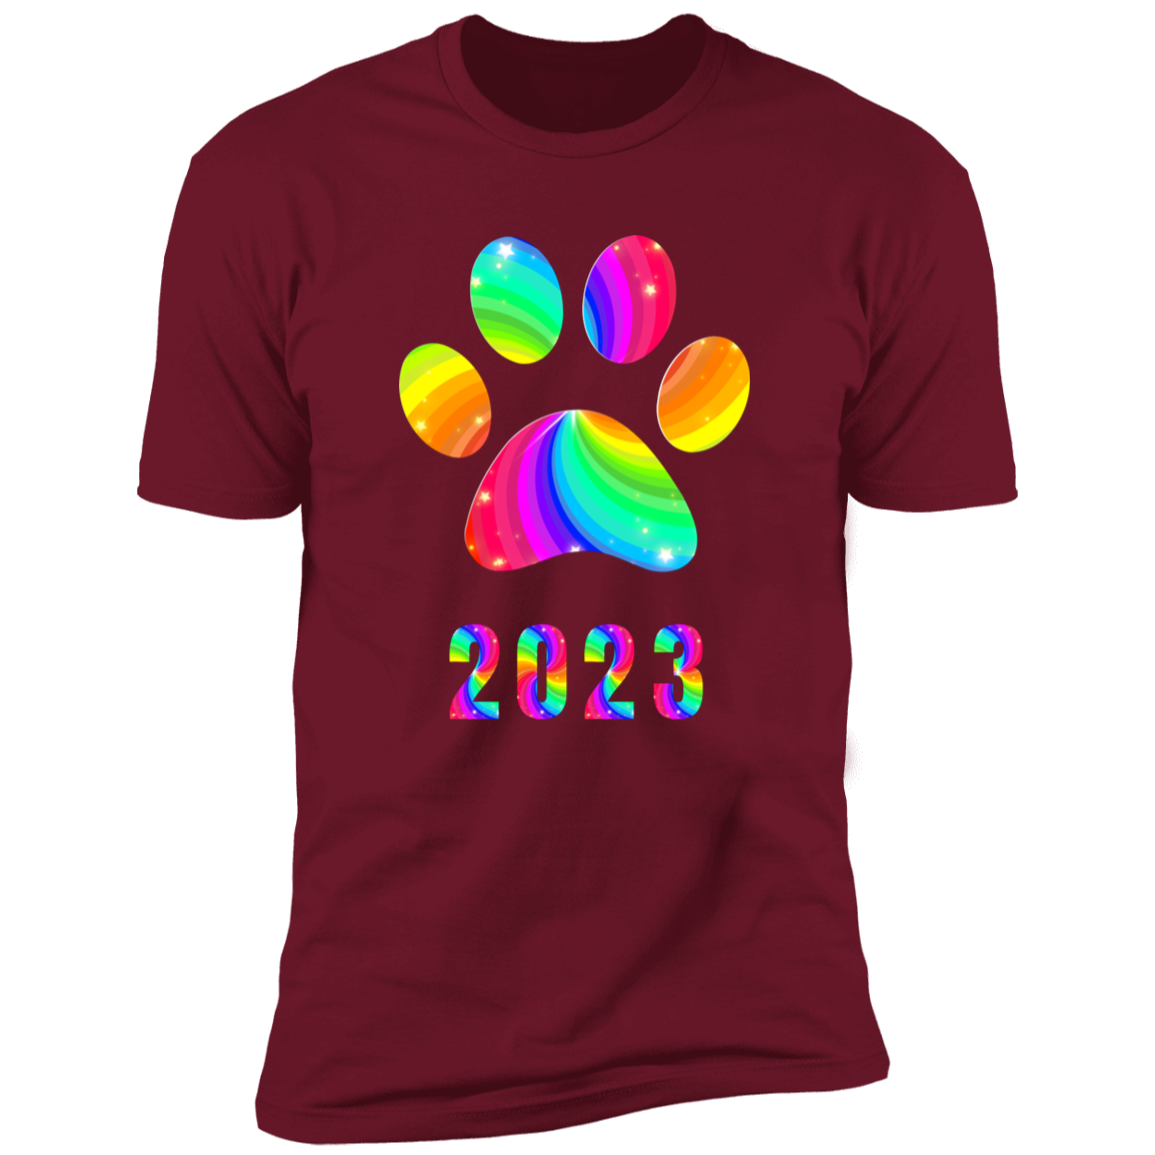 Pride Paw 2023 (Swirl) Pride T-shirt, Paw Pride Dog Shirt for humans, in cardinal red